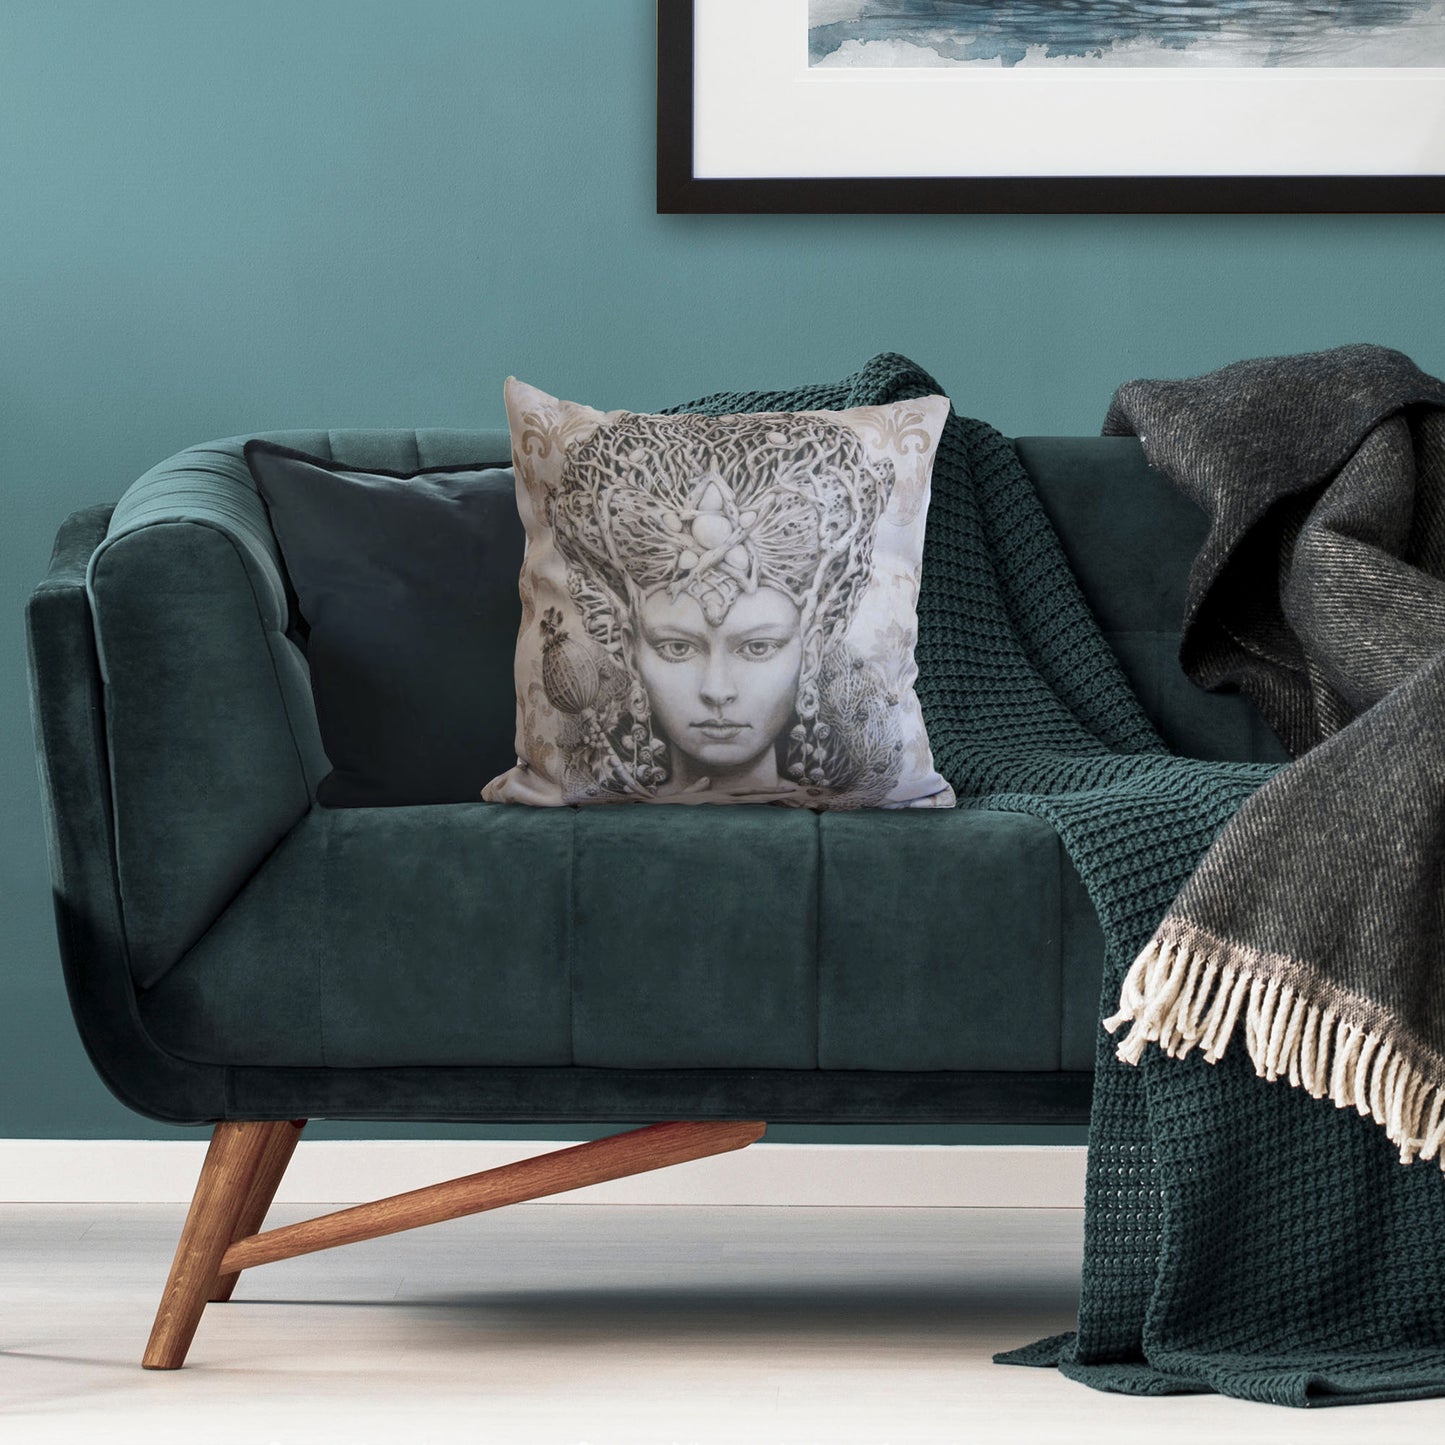 Cushion cover featuring 'Christmas Angel' artwork